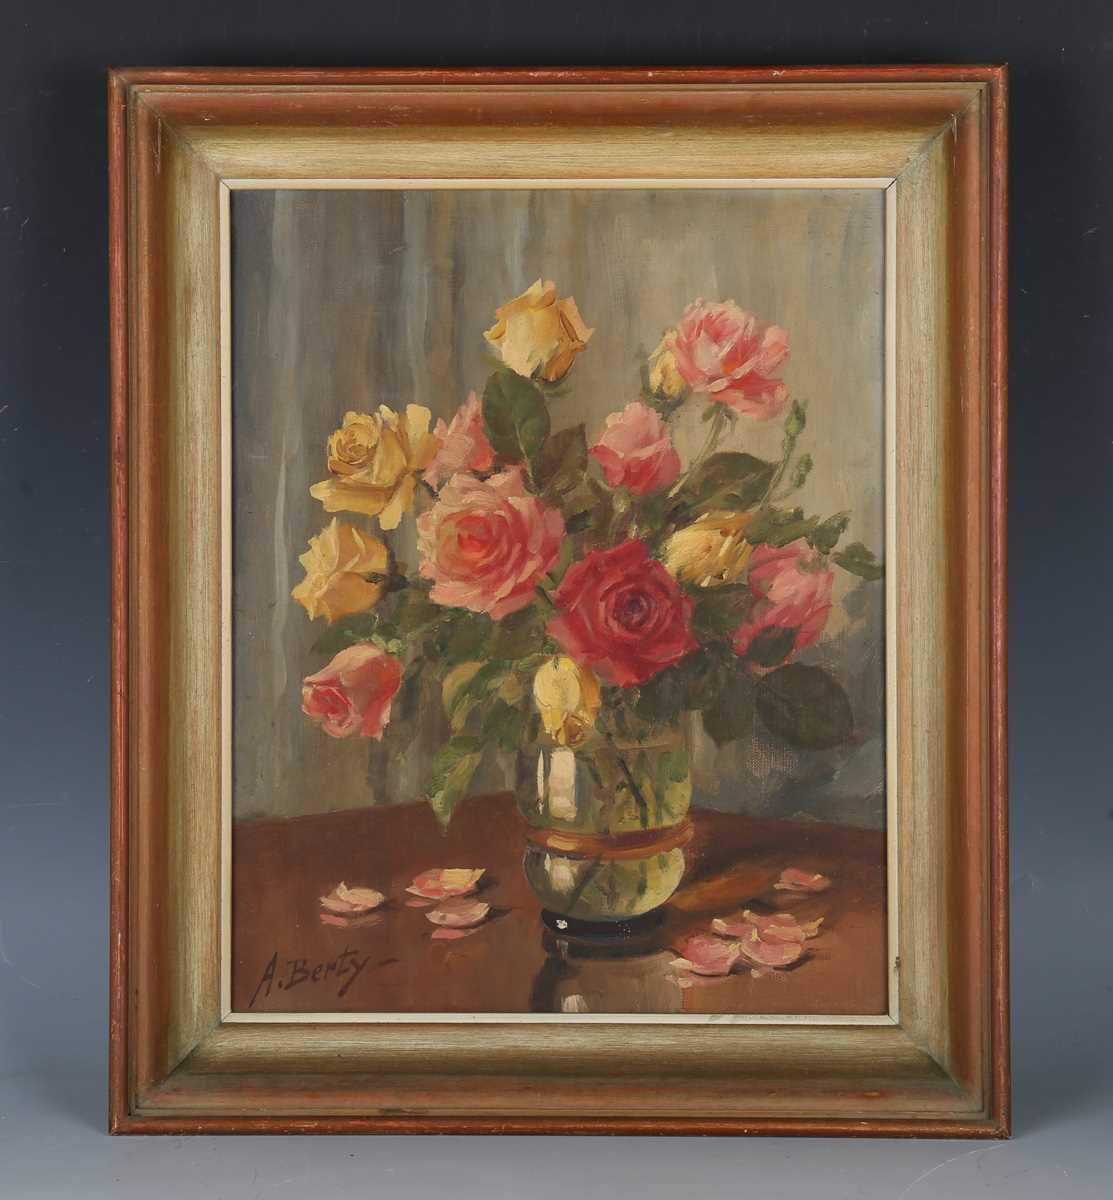 Anne Berty – Still Life with Pink and Yellow Roses, 20th century oil on canvas, signed, 40cm x 31. - Image 2 of 4